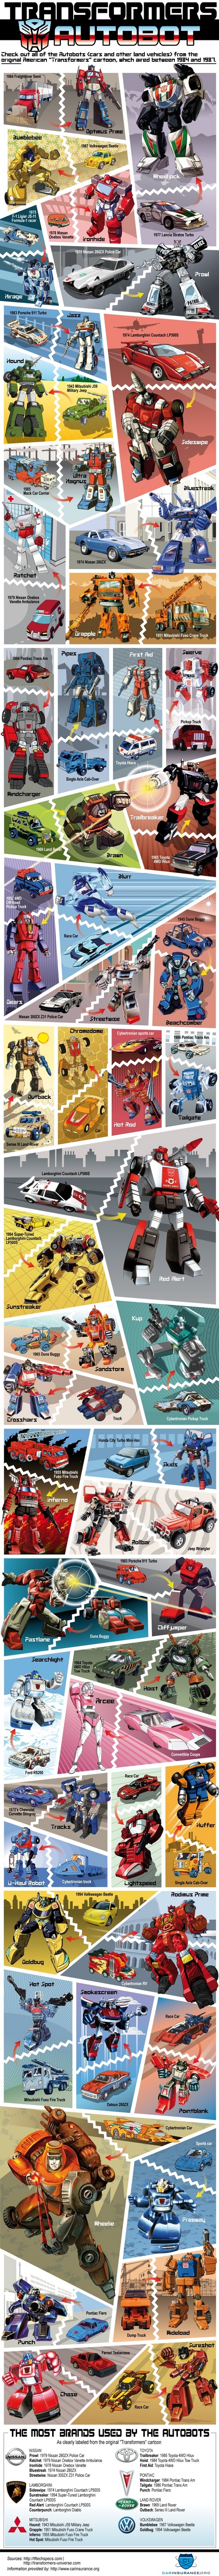 Transformers Infographic